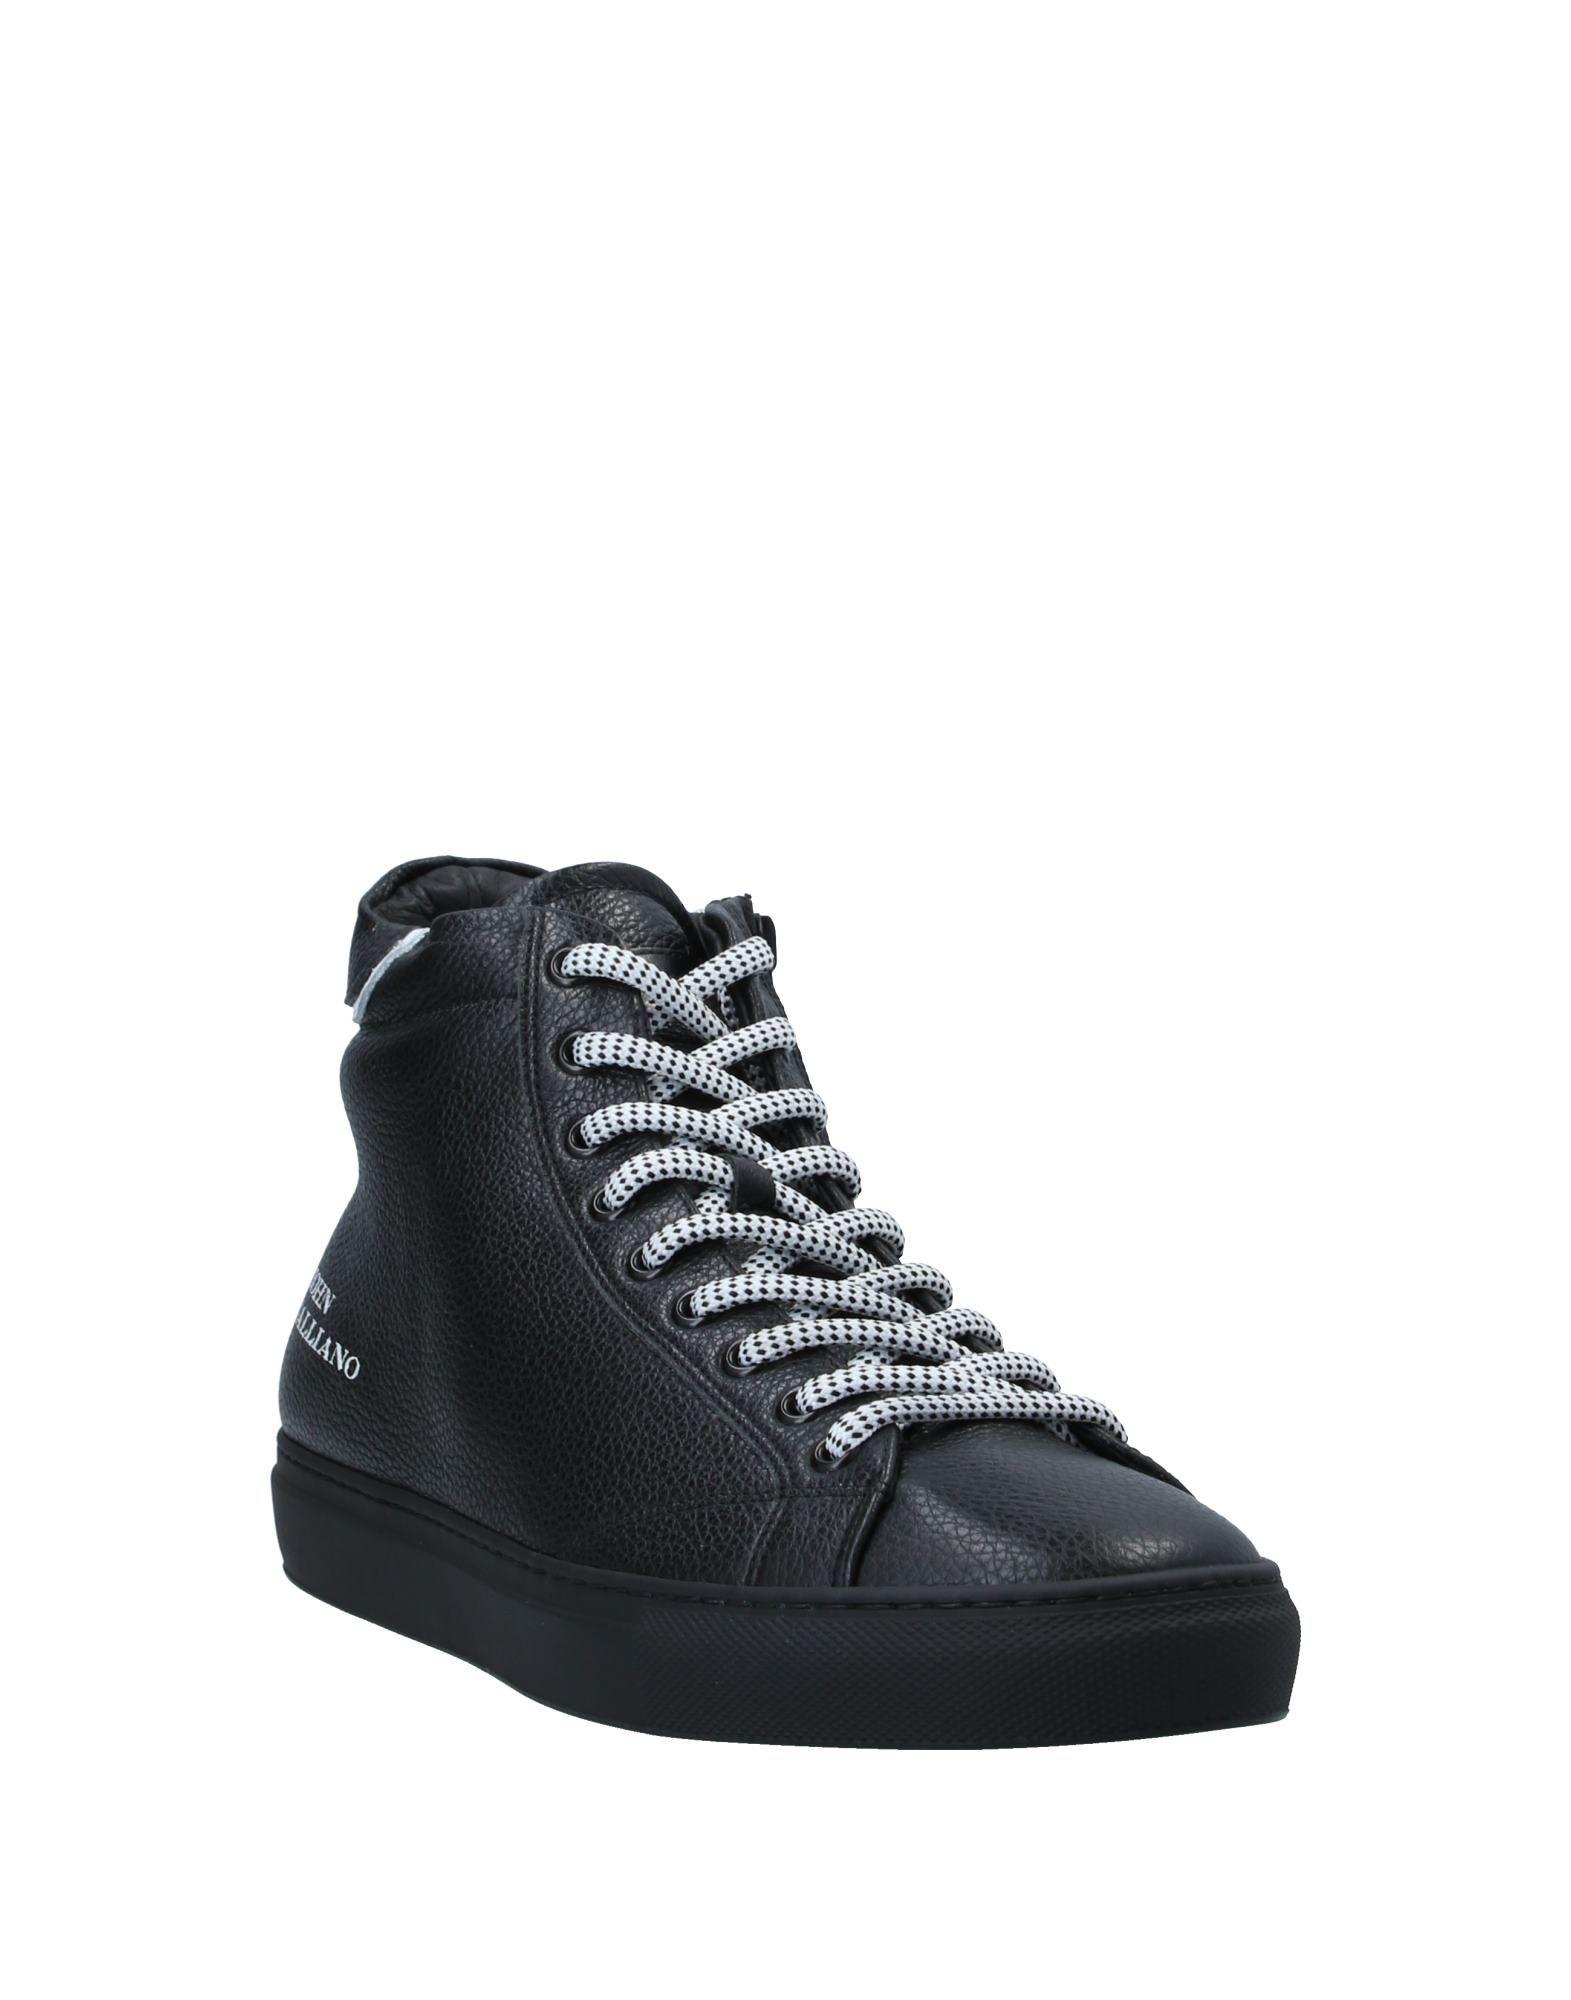 John Galliano Leather High-tops & Sneakers in Black for Men - Lyst